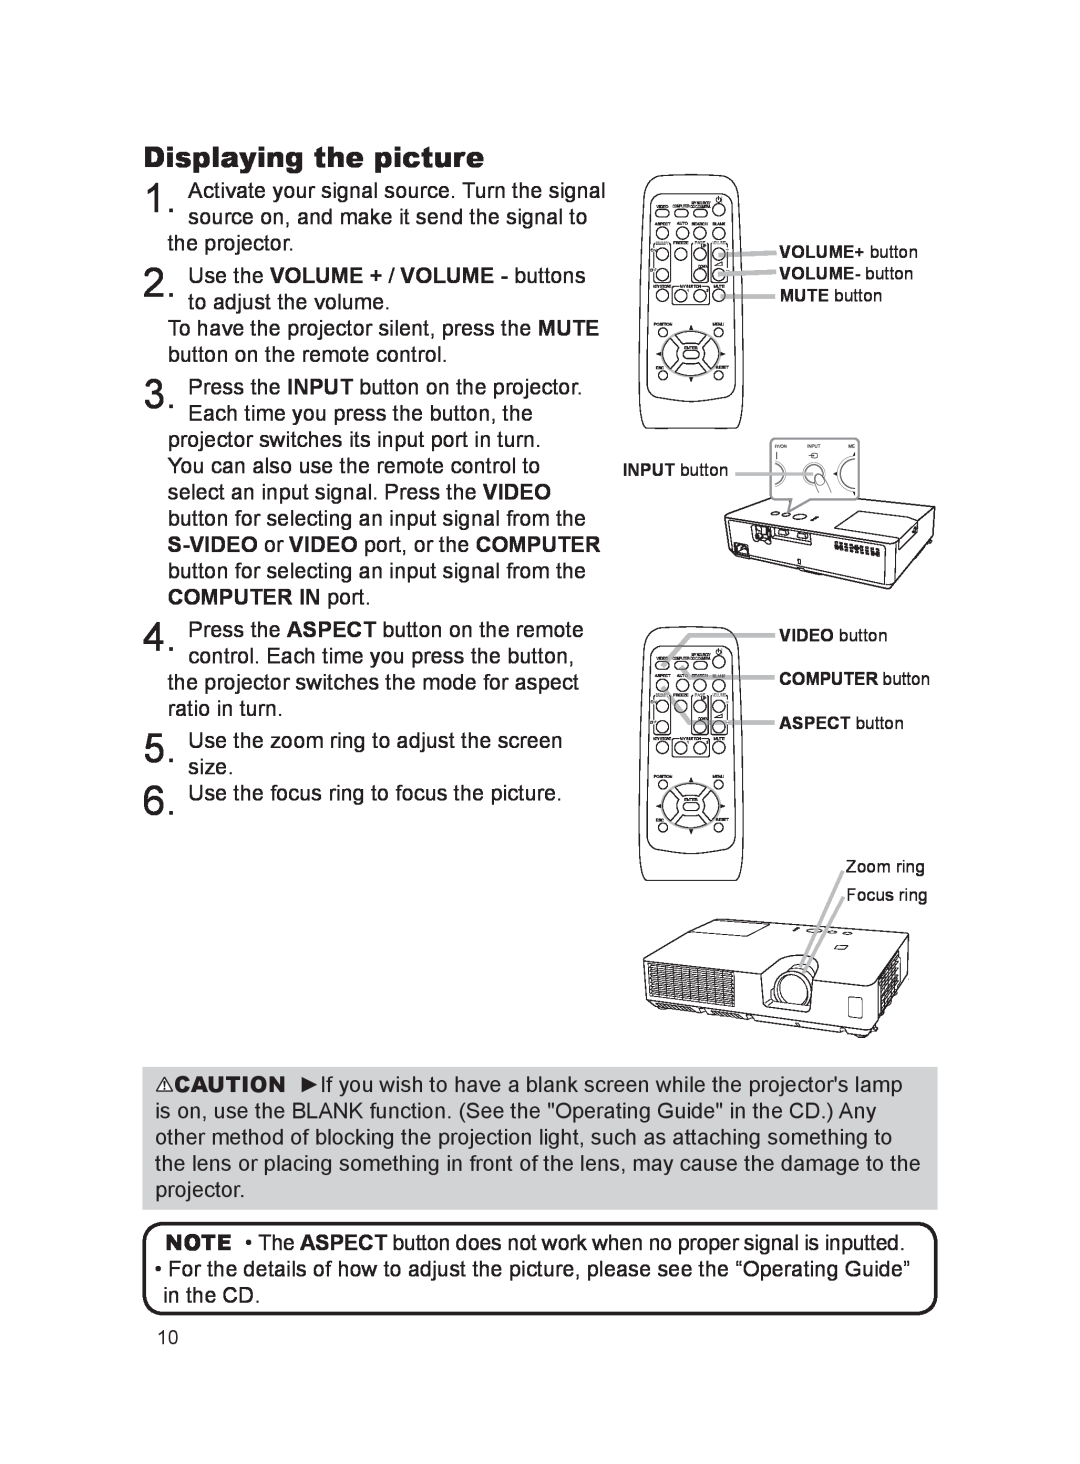 Dukane MODEL 8788 user manual Displaying the picture 